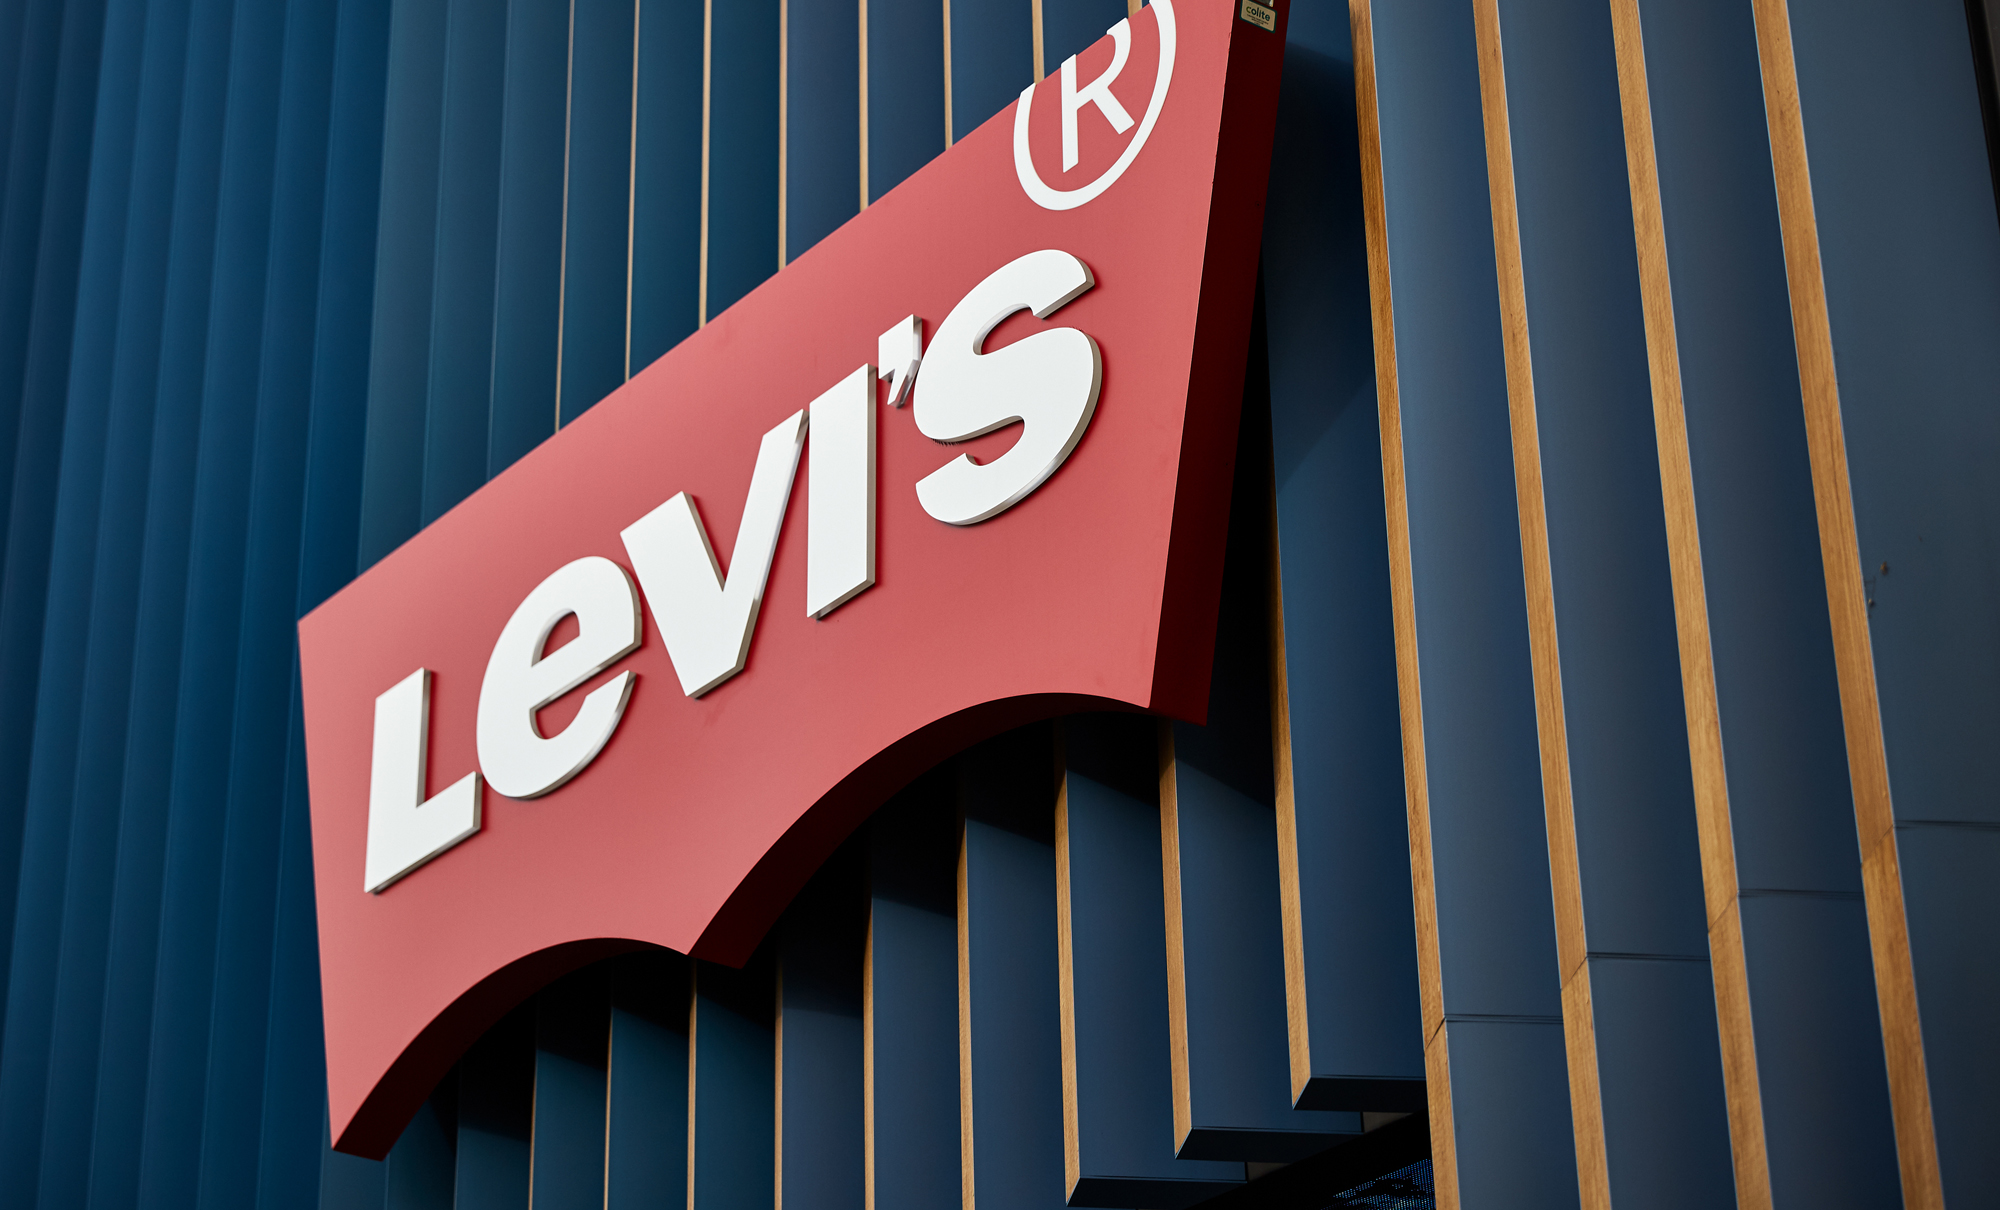 Skinny Jeans Will Never Go Away: Levi’s CEO